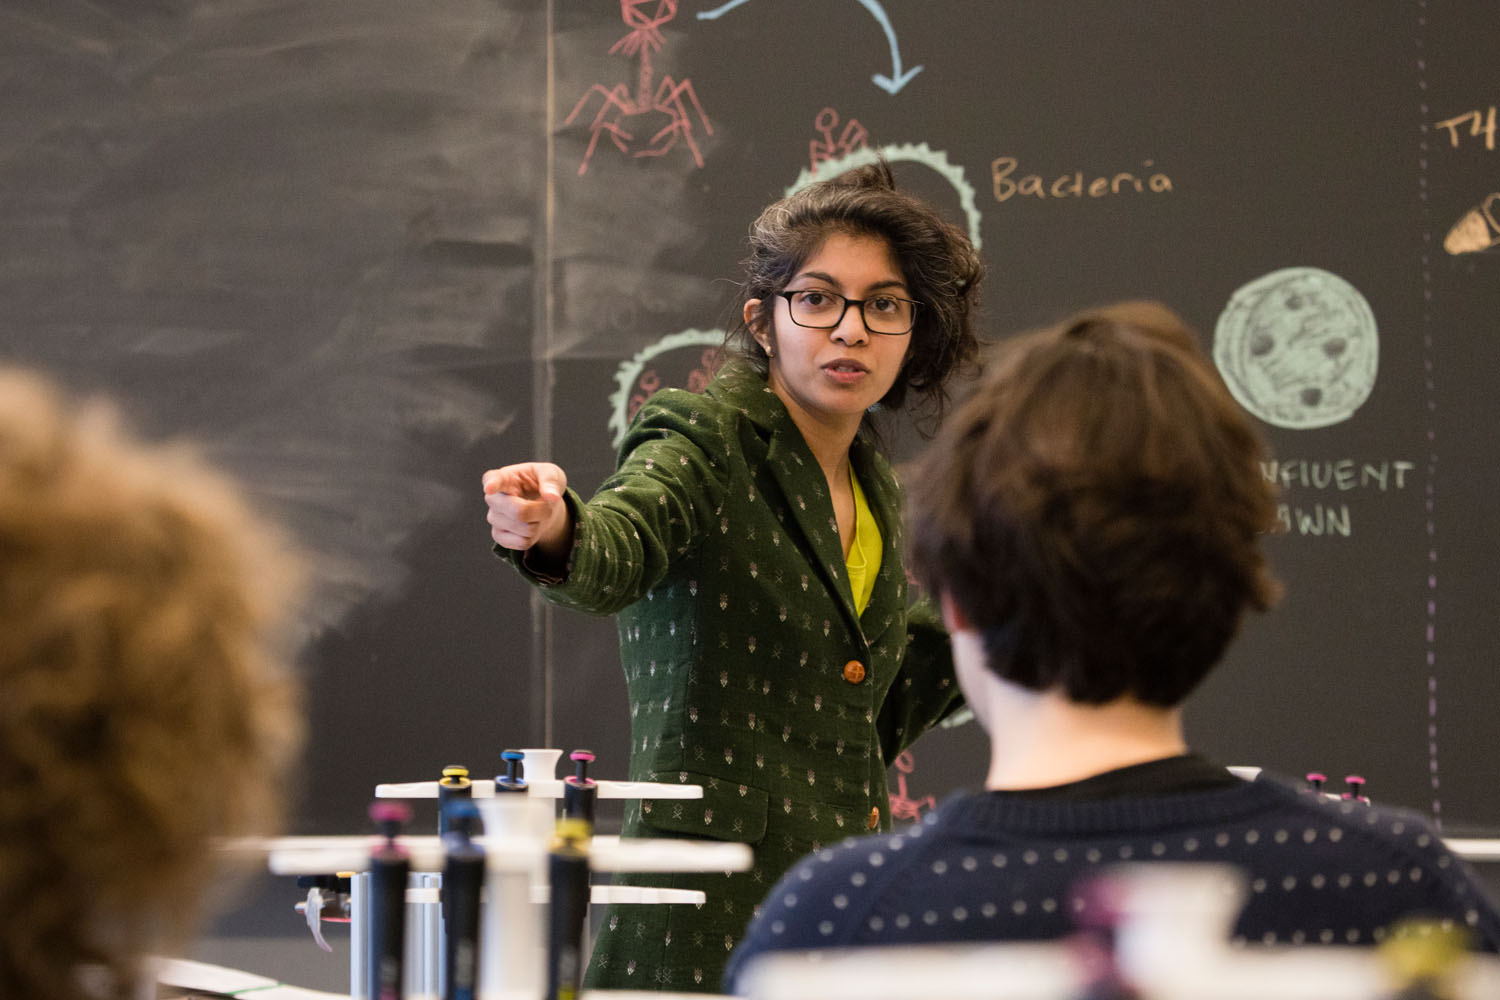 Teagle Foundation and National Endowment for the Humanities Award Bard College $50,000 Cornerstone: Learning for Living Grant to Develop Second-Year Common Courses